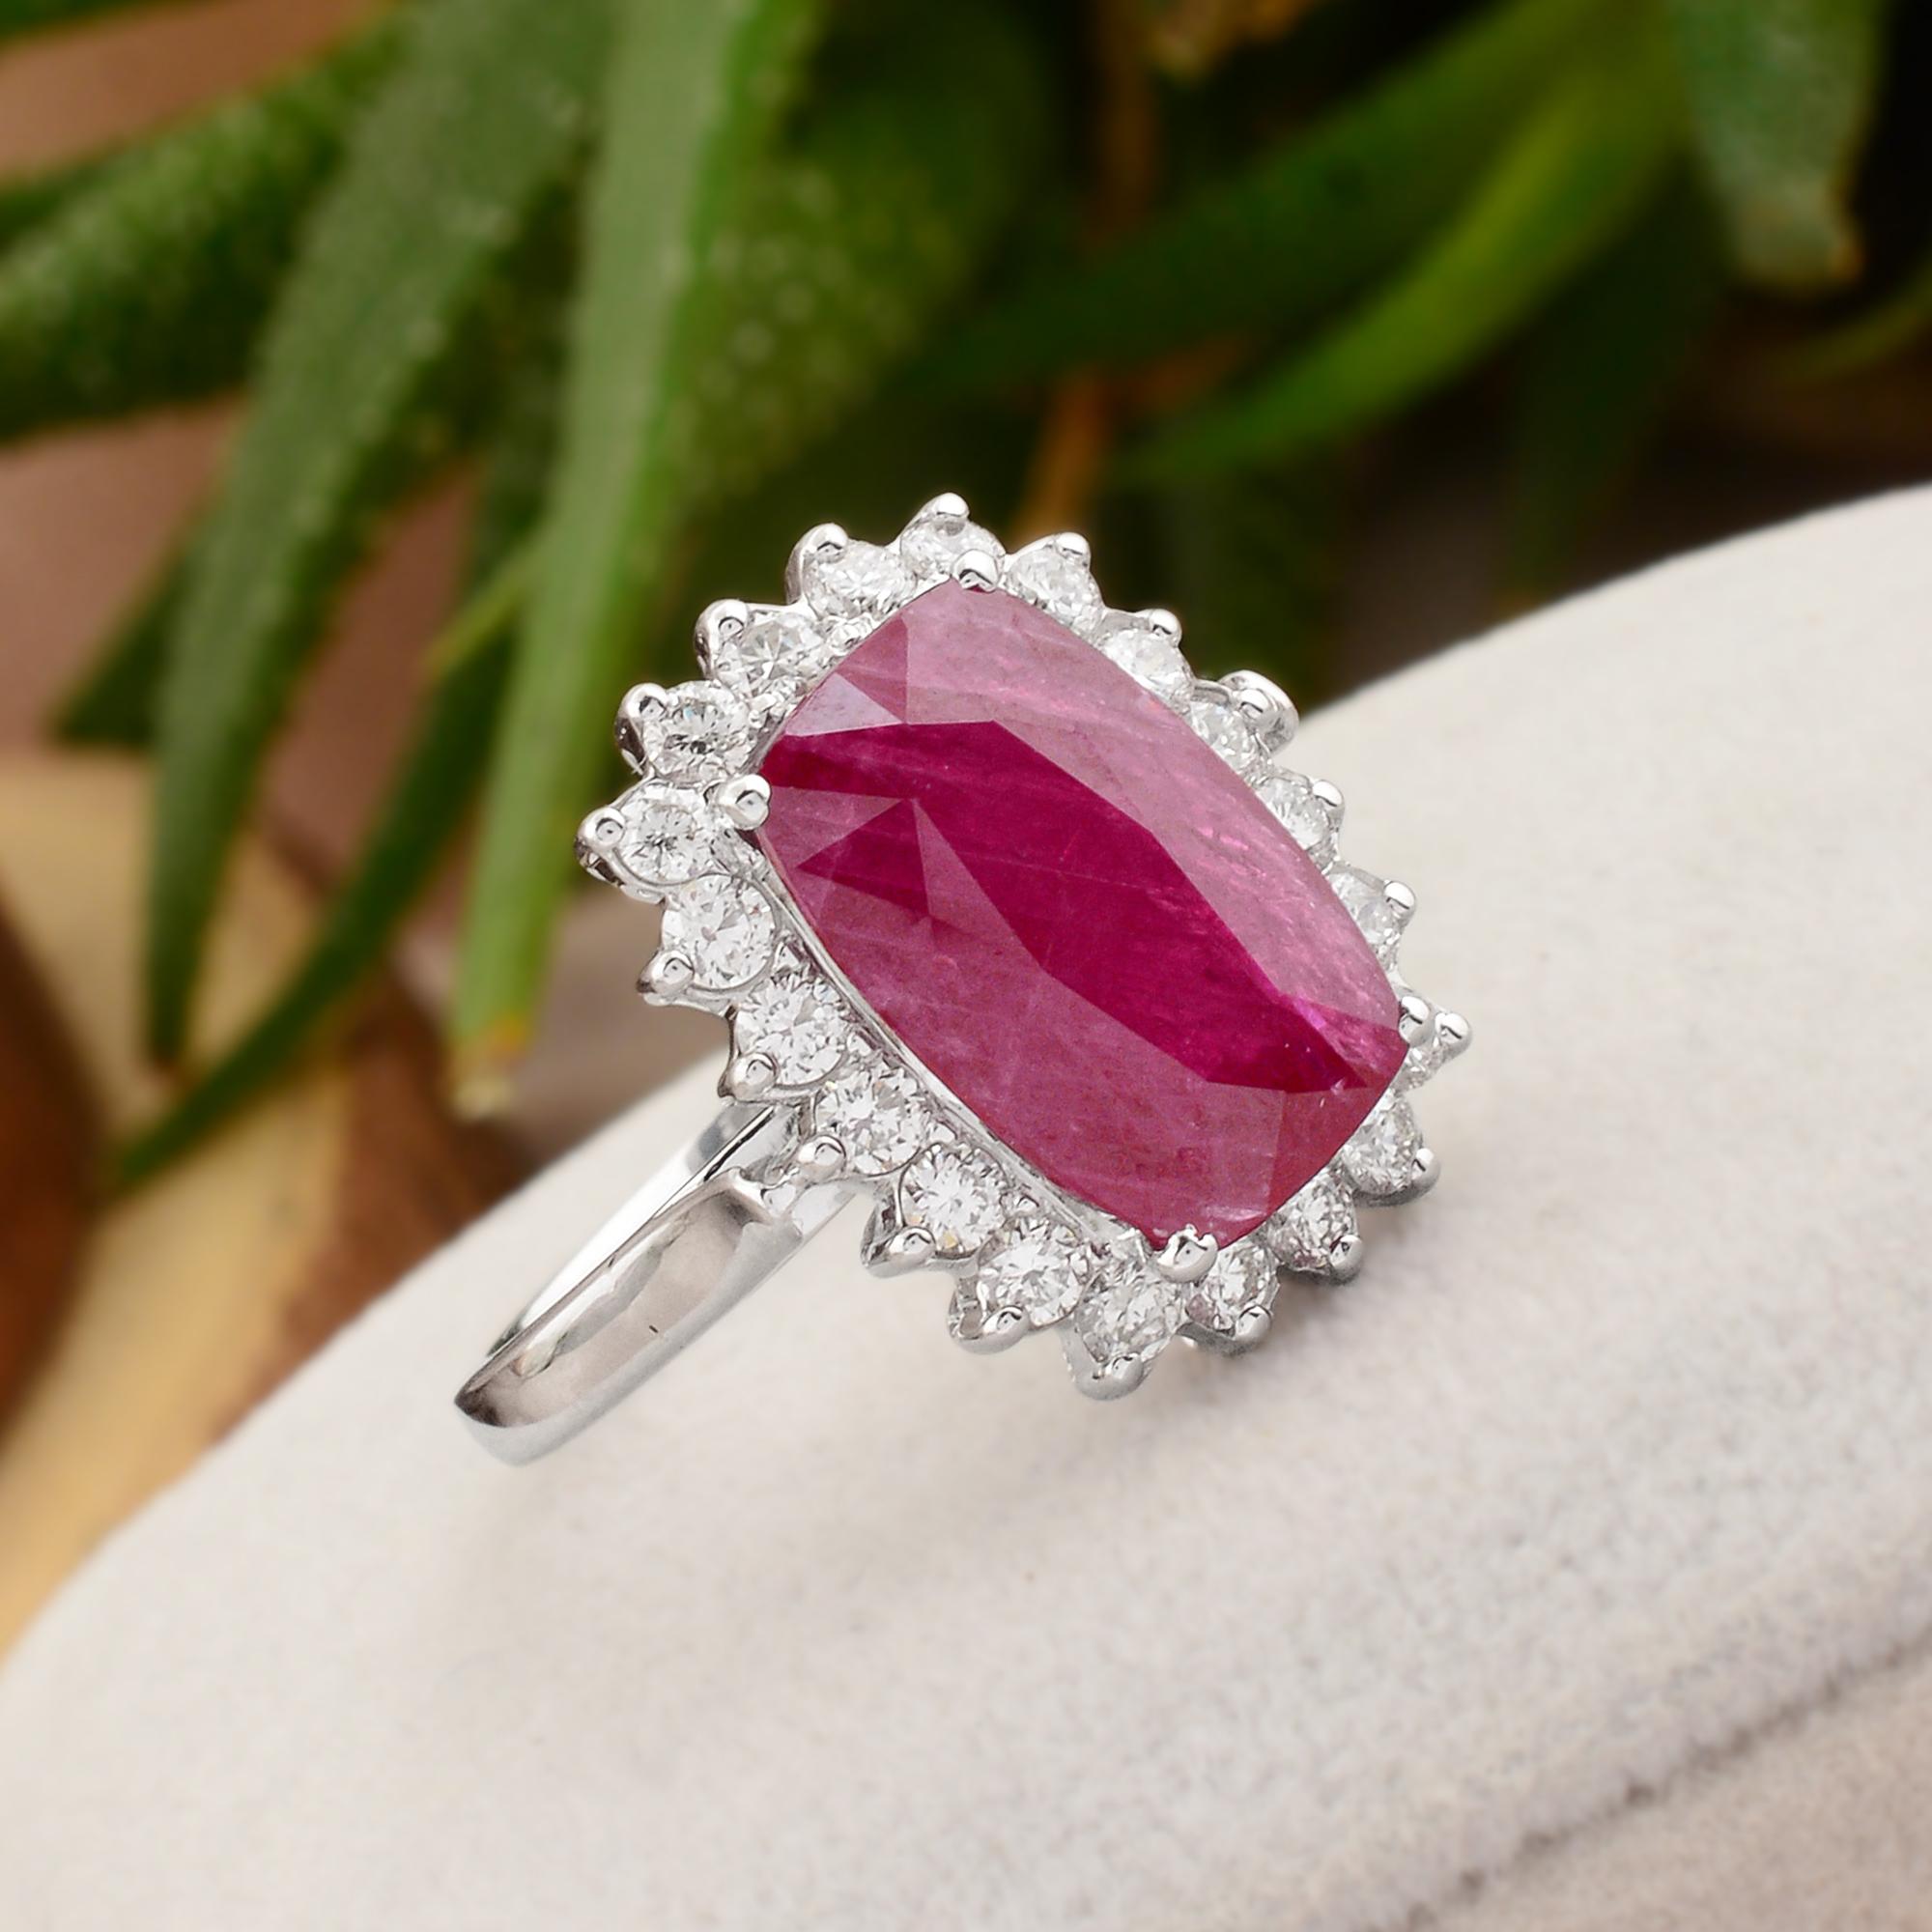 For Sale:  Ruby Gemstone Cocktail Ring Diamond Pave 18k White Gold Handmade Fine Jewelry 3